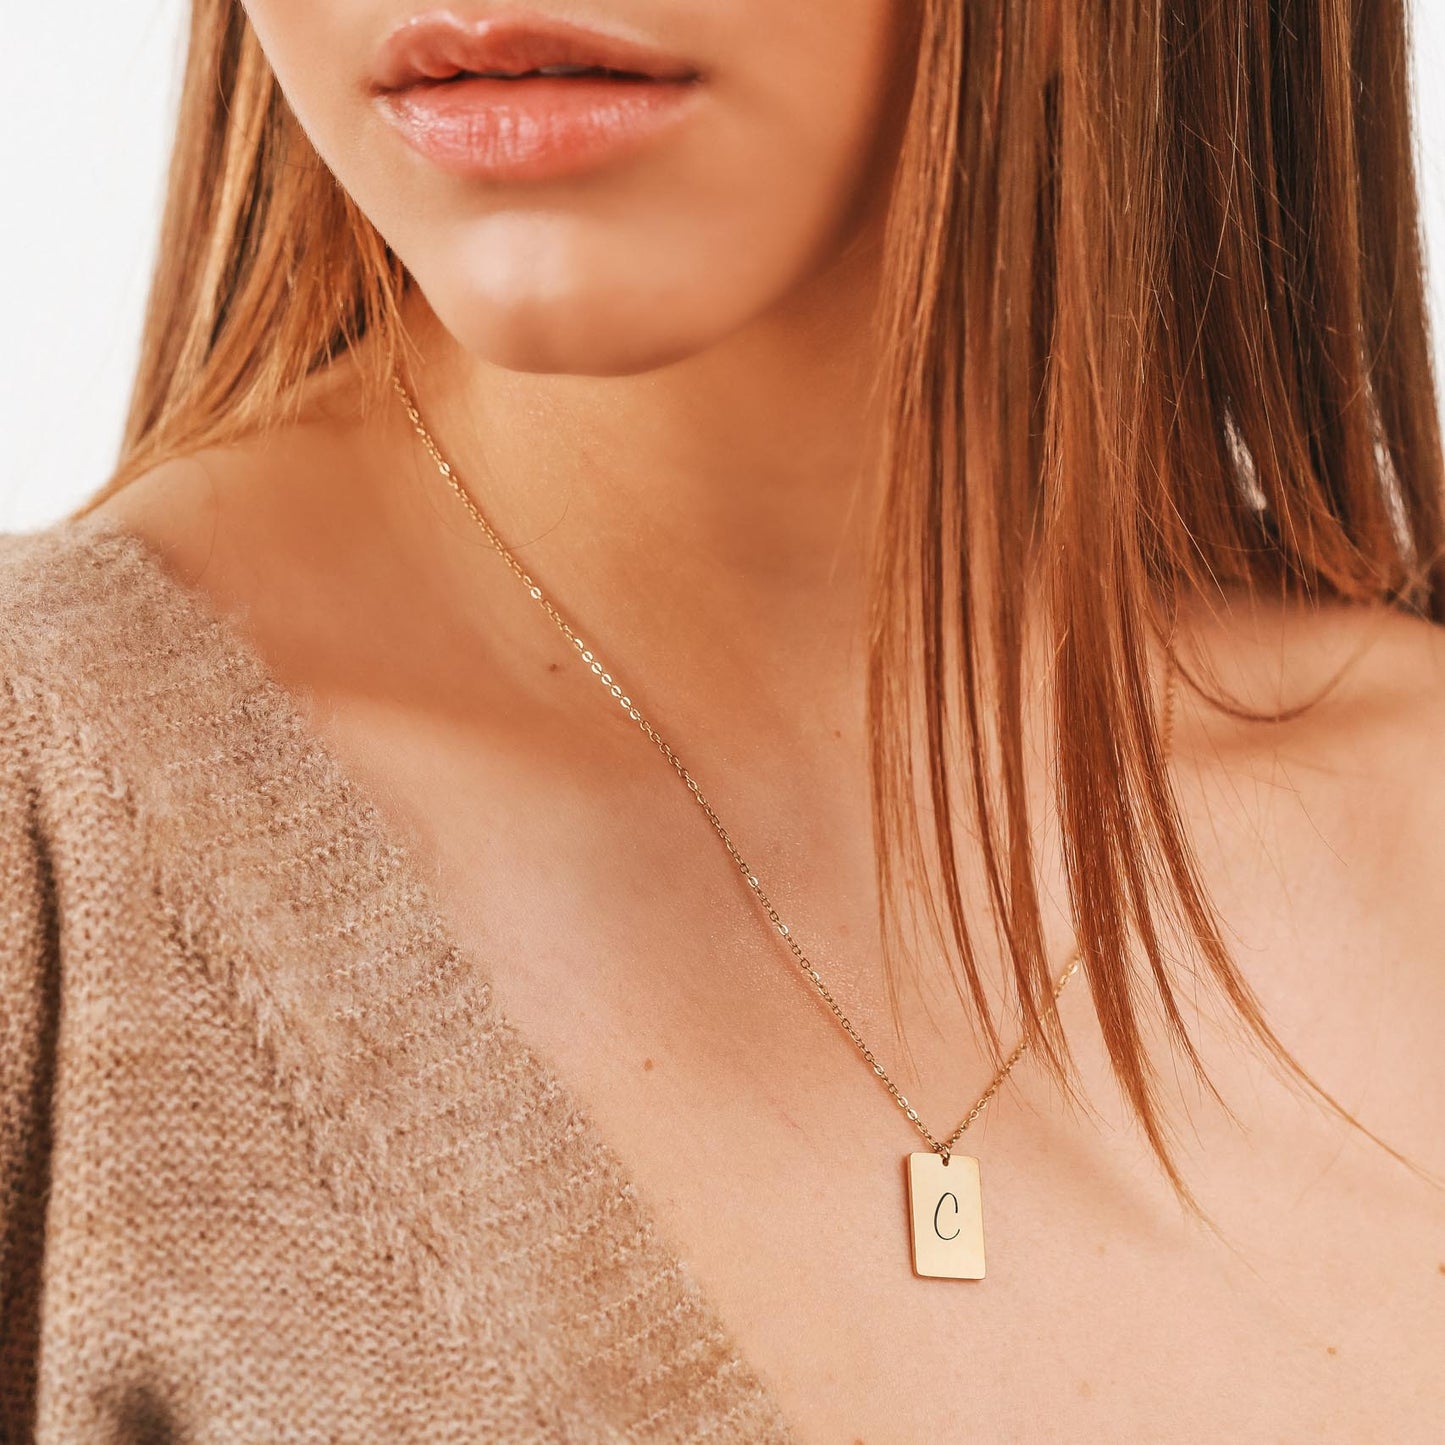 MINI RECTANGLE INITIAL NECKLACE